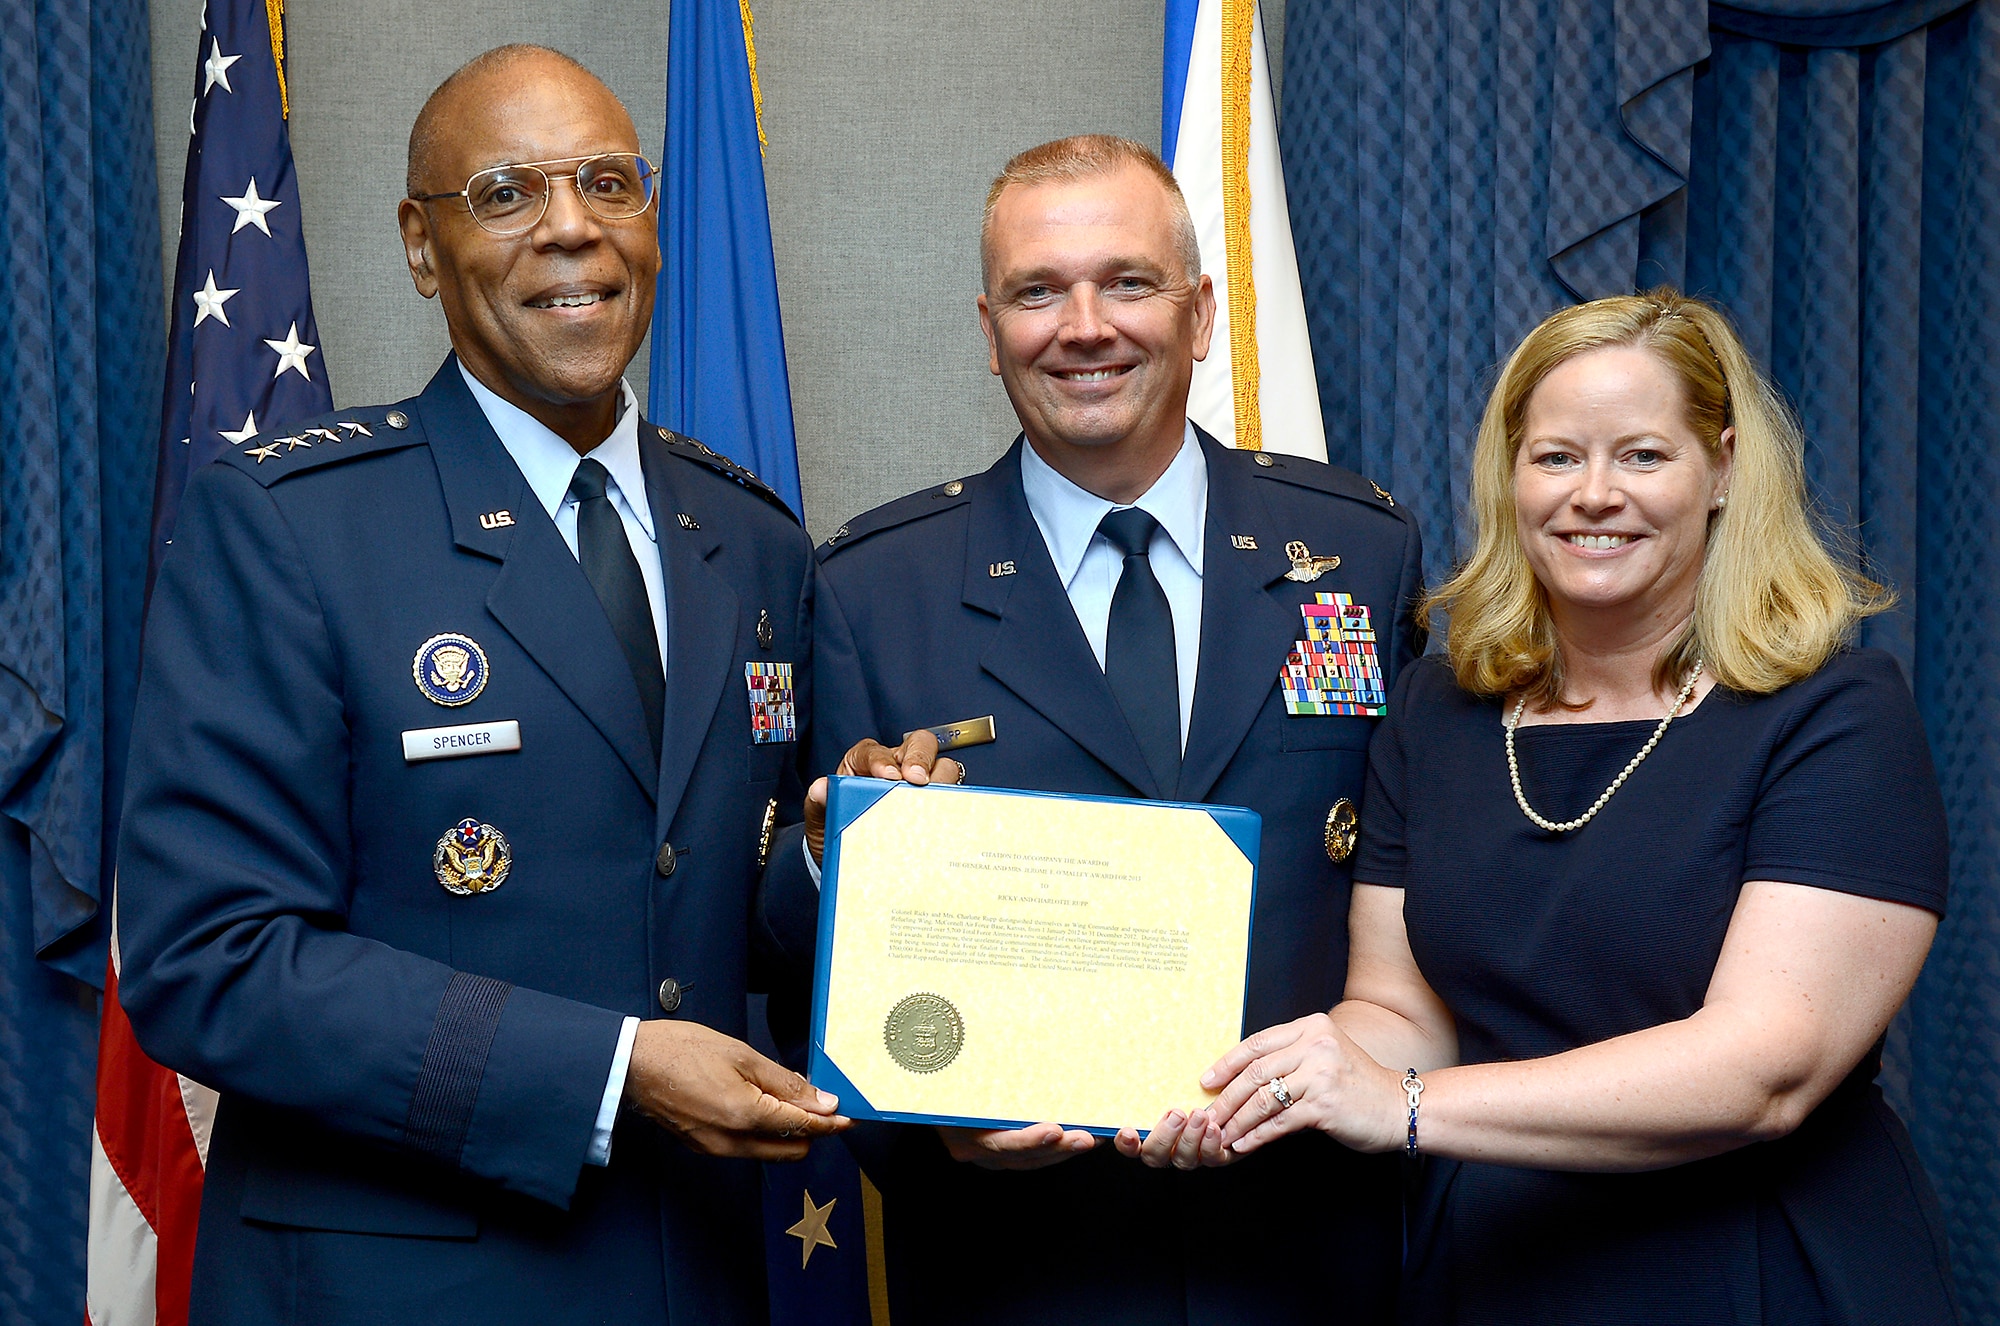 Air Force Vice Chief of Staff Gen. Larry O. Spencer presents Col. Ricky Rupp and his wife, Charlotte, with the 2013 General and Mrs. Jerome F. O'Malley Award June 27, 2014, during a Pentagon ceremony.  Rupp, the special assistant to the commander at U.S./Republic of Korea Combined Forces Command at U.S. Army Garrison Yongsan.  The award was earned during the Rupps' time while leading the 22nd Air Refueling Wing at McConnell Air Force Base, Kan.  (U.S. Air Force photo/Scott M. Ash)